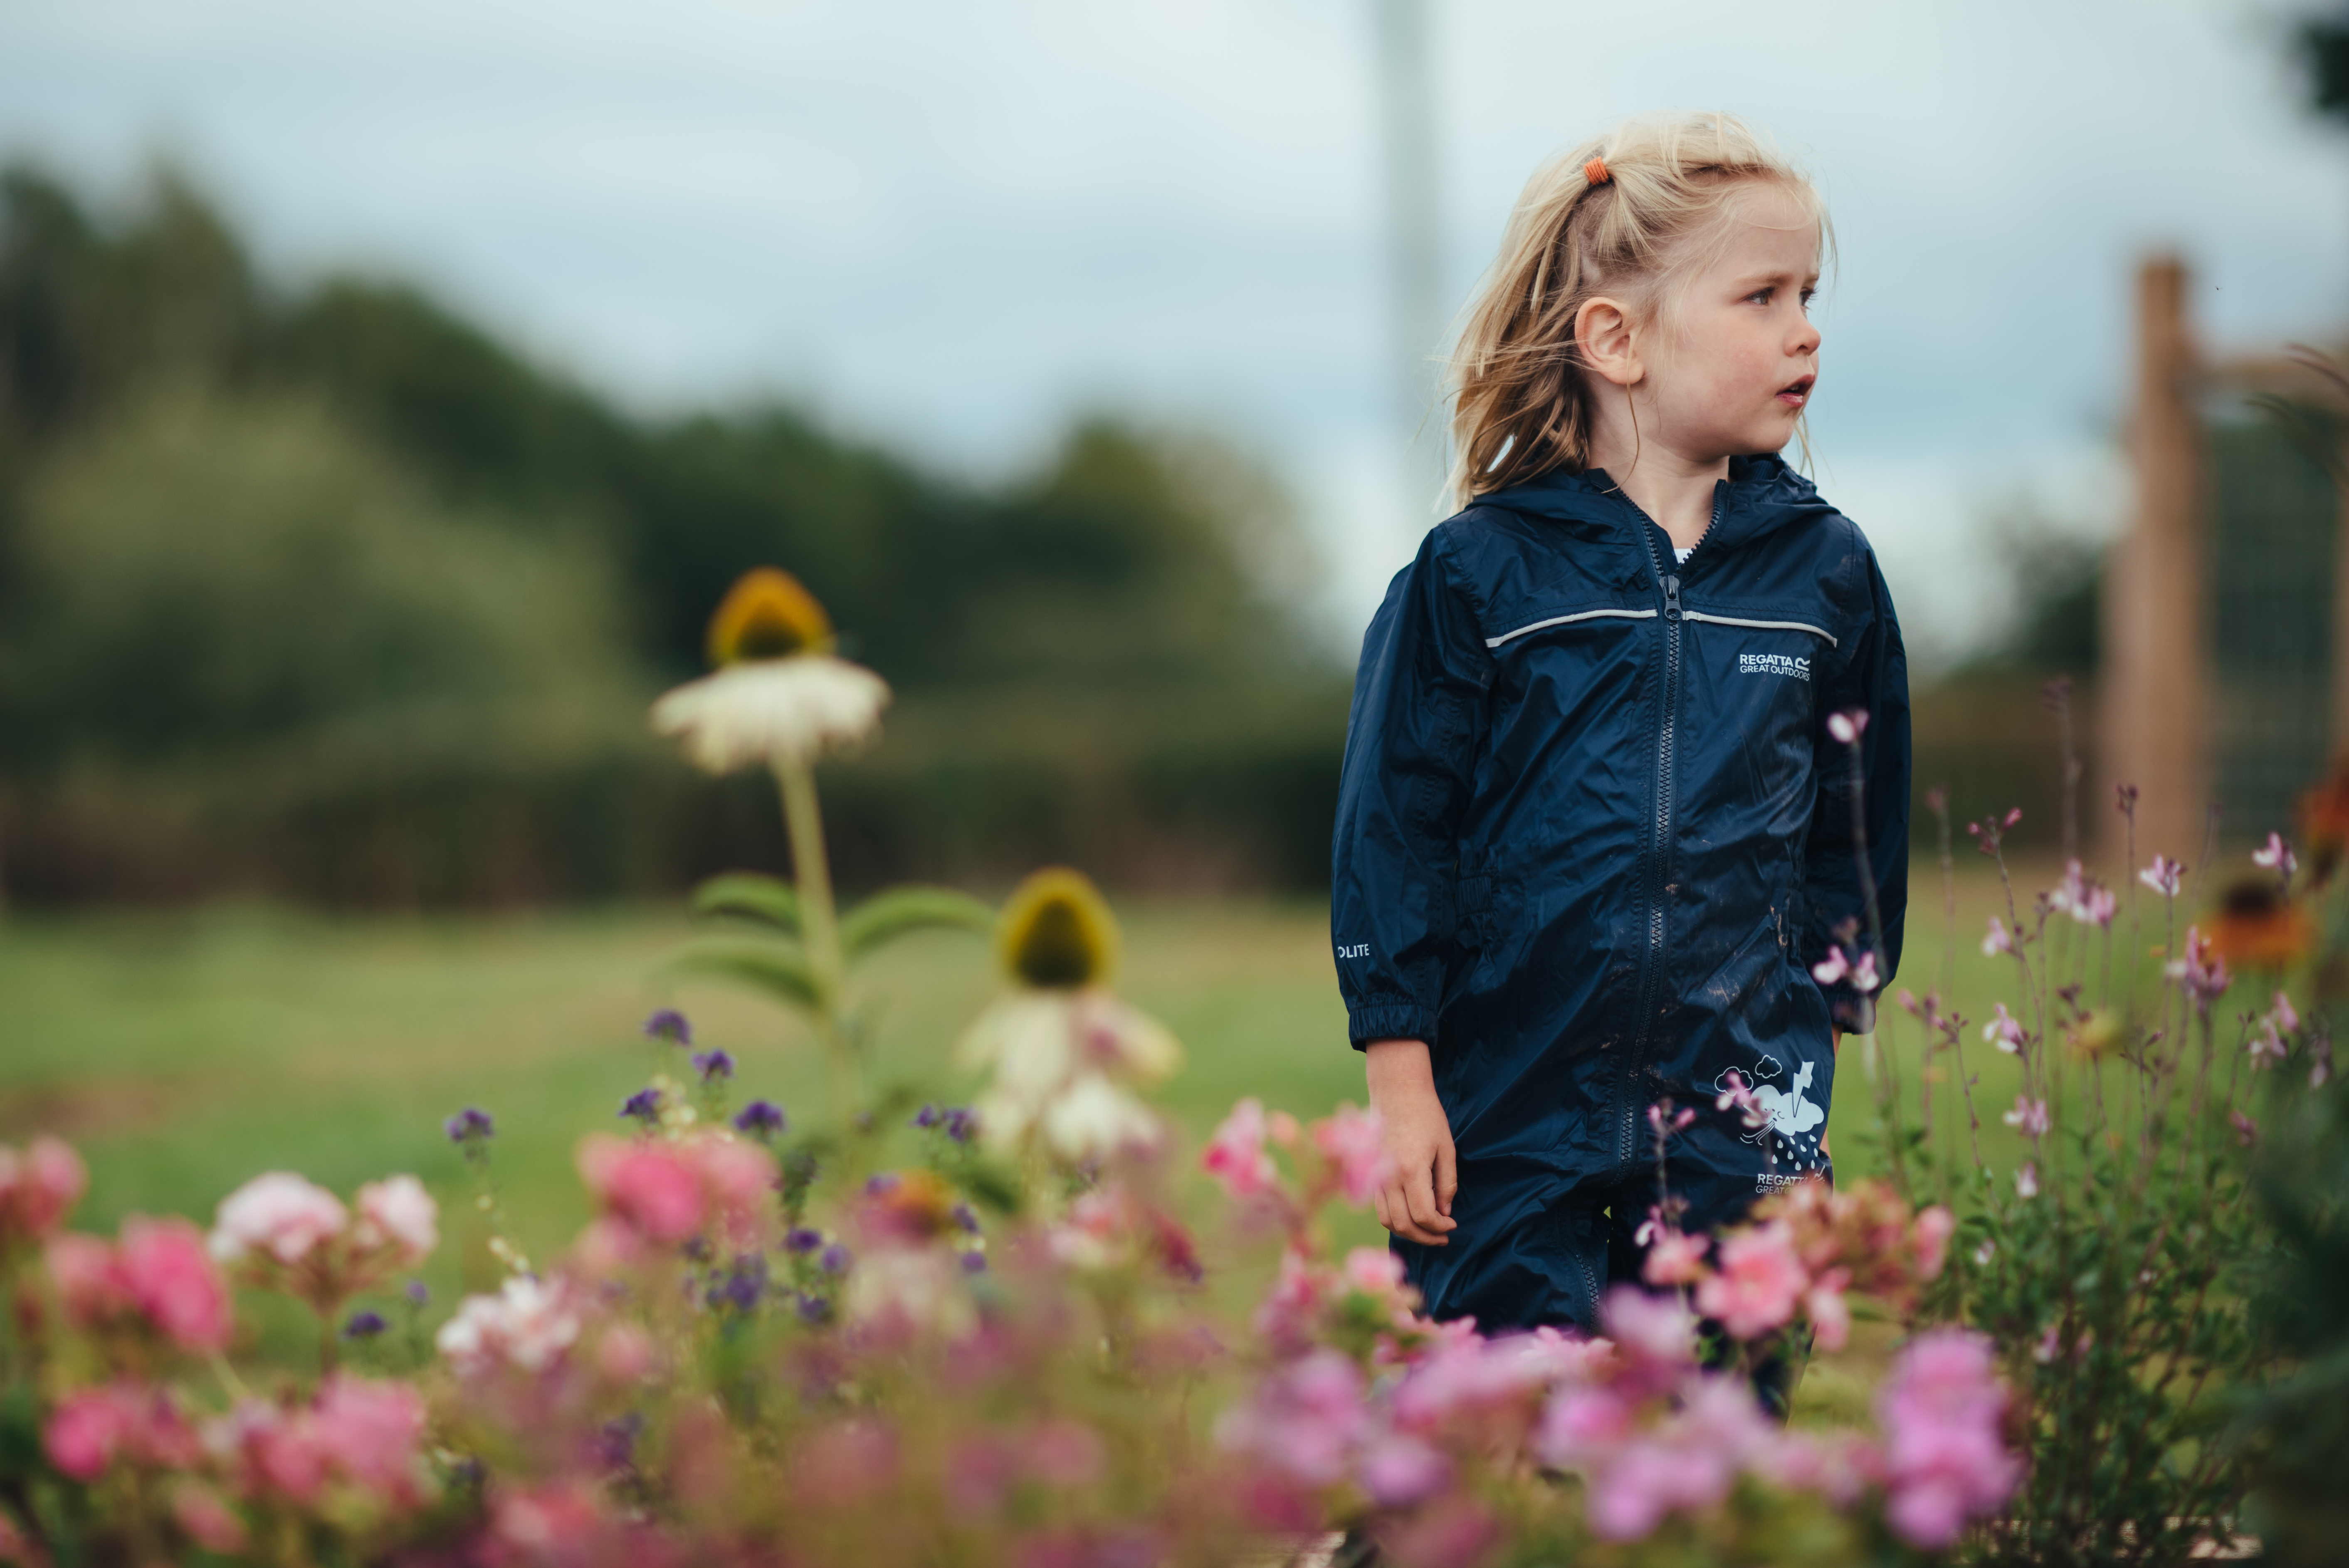 Young girl standing amongst flowers